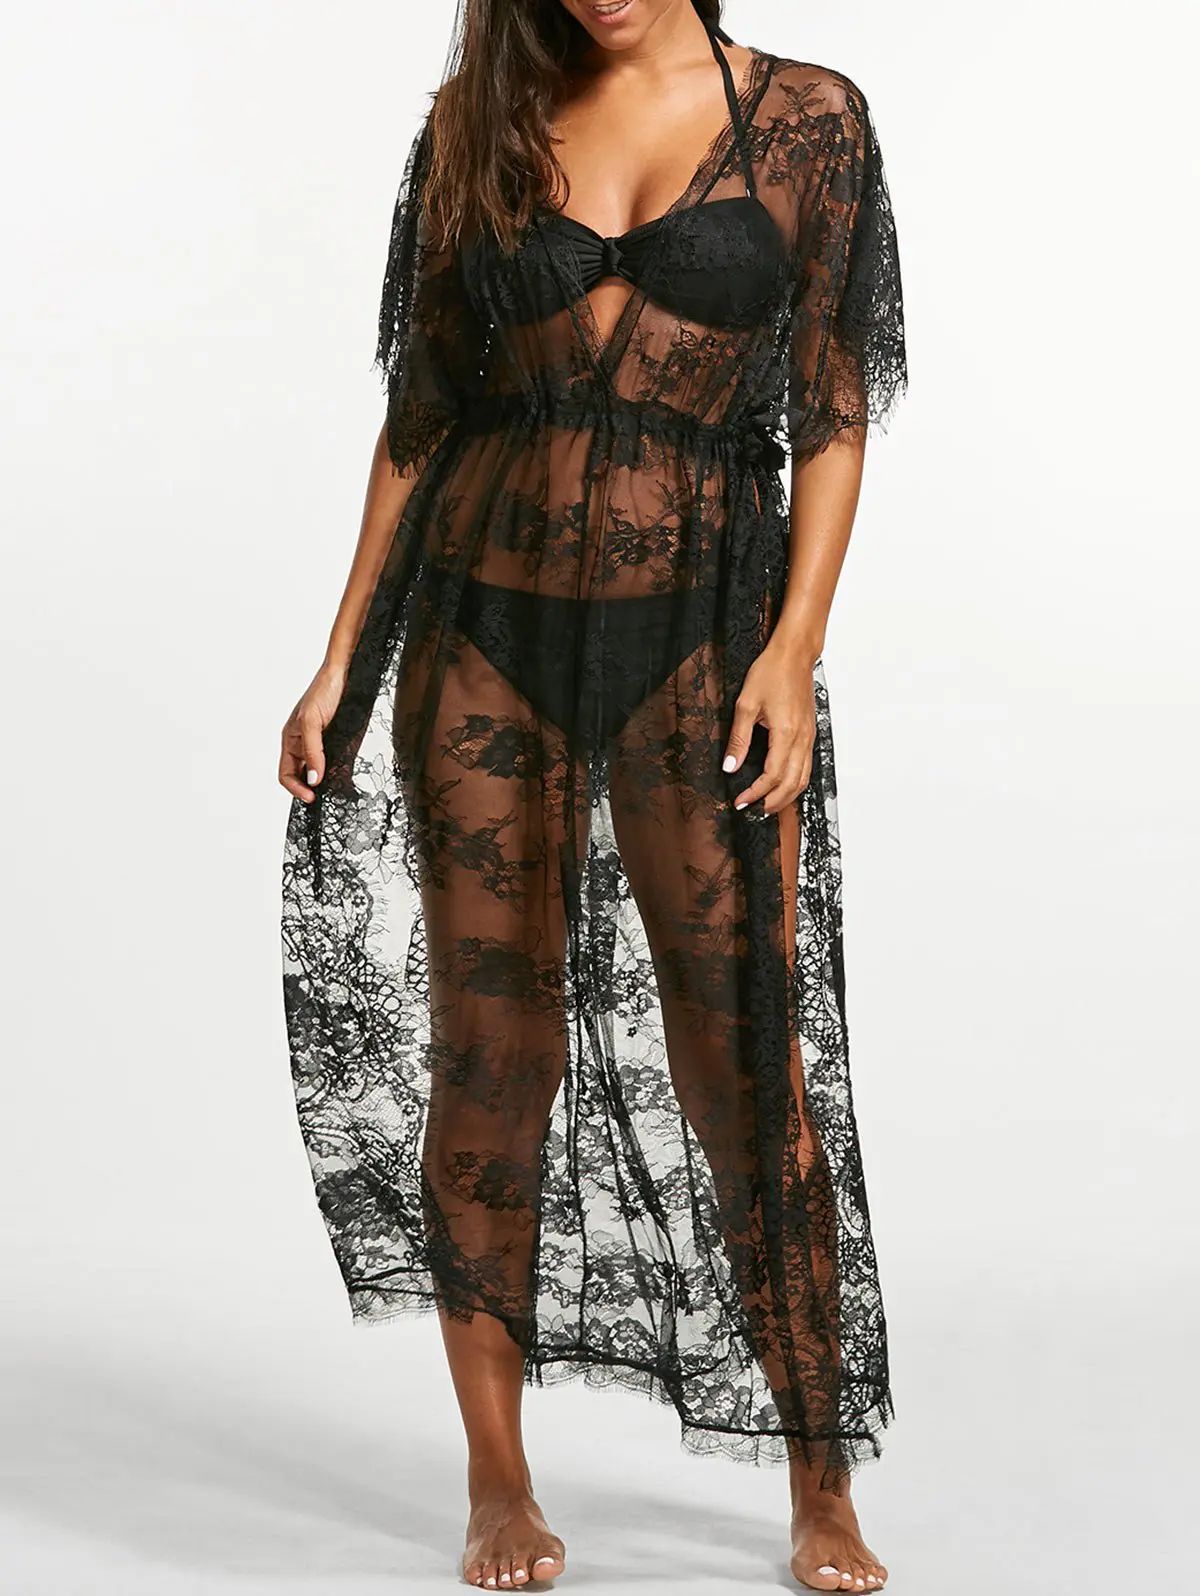 Sheer Lace Maxi Cover Up Dress for Beach | Rosegal US